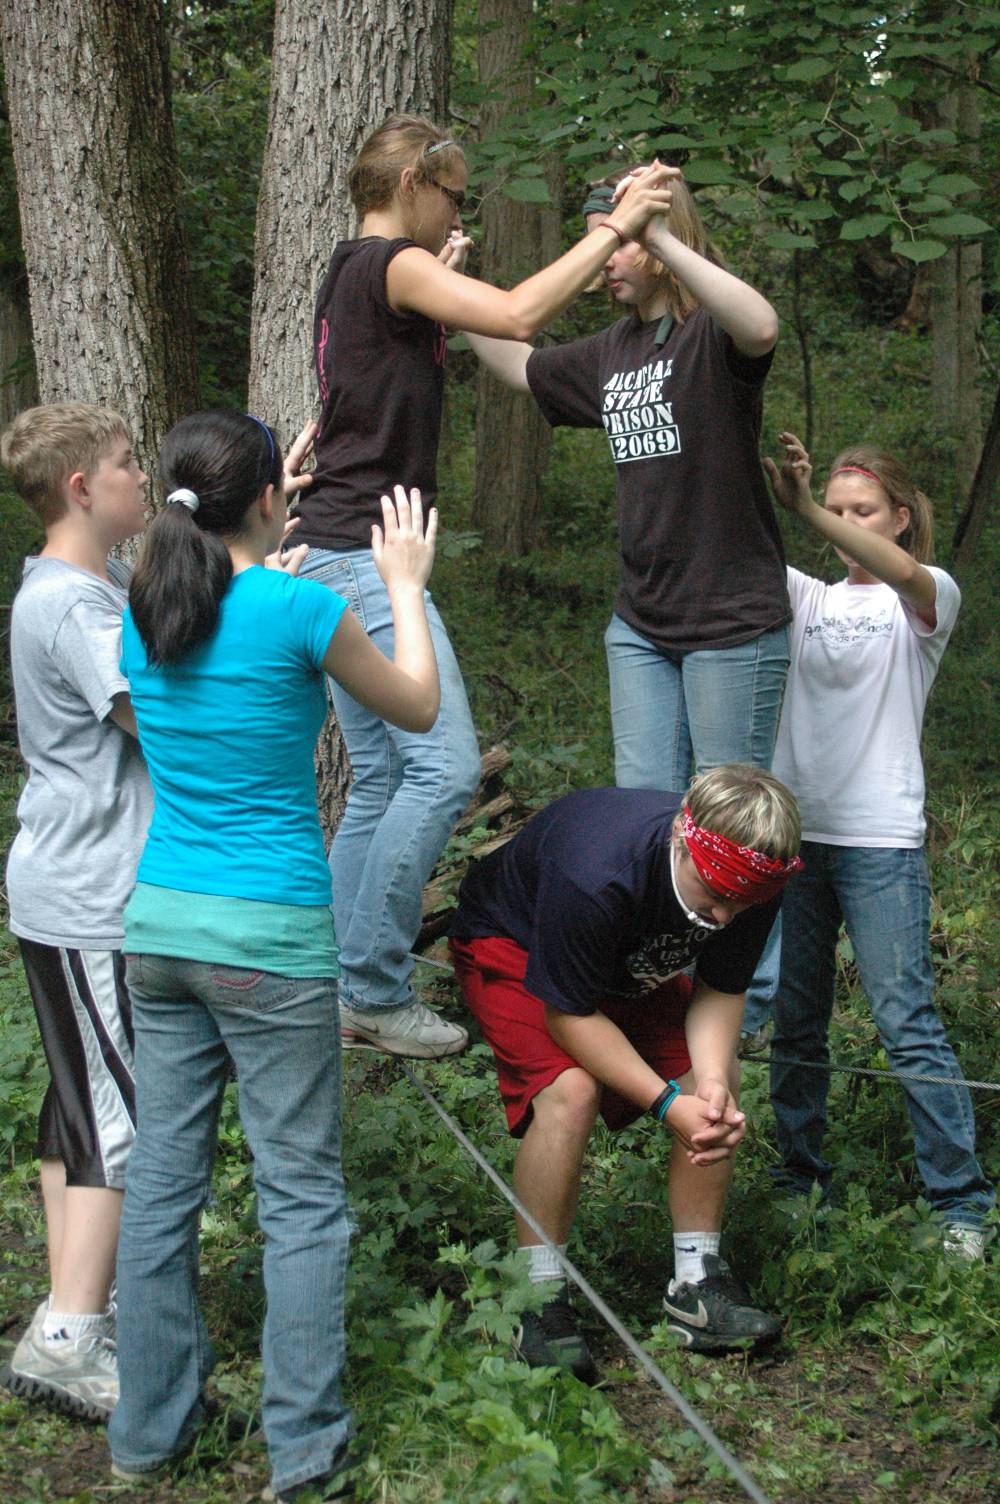 TOP IOWA SUMMER CAMP: Pilgrim Heights Camp & Retreat Center is a Top Summer Camp located in Montour Iowa offering many fun and enriching camp programs. Pilgrim Heights Camp & Retreat Center also offers CIT/LIT and/or Teen Leadership Opportunities, too.